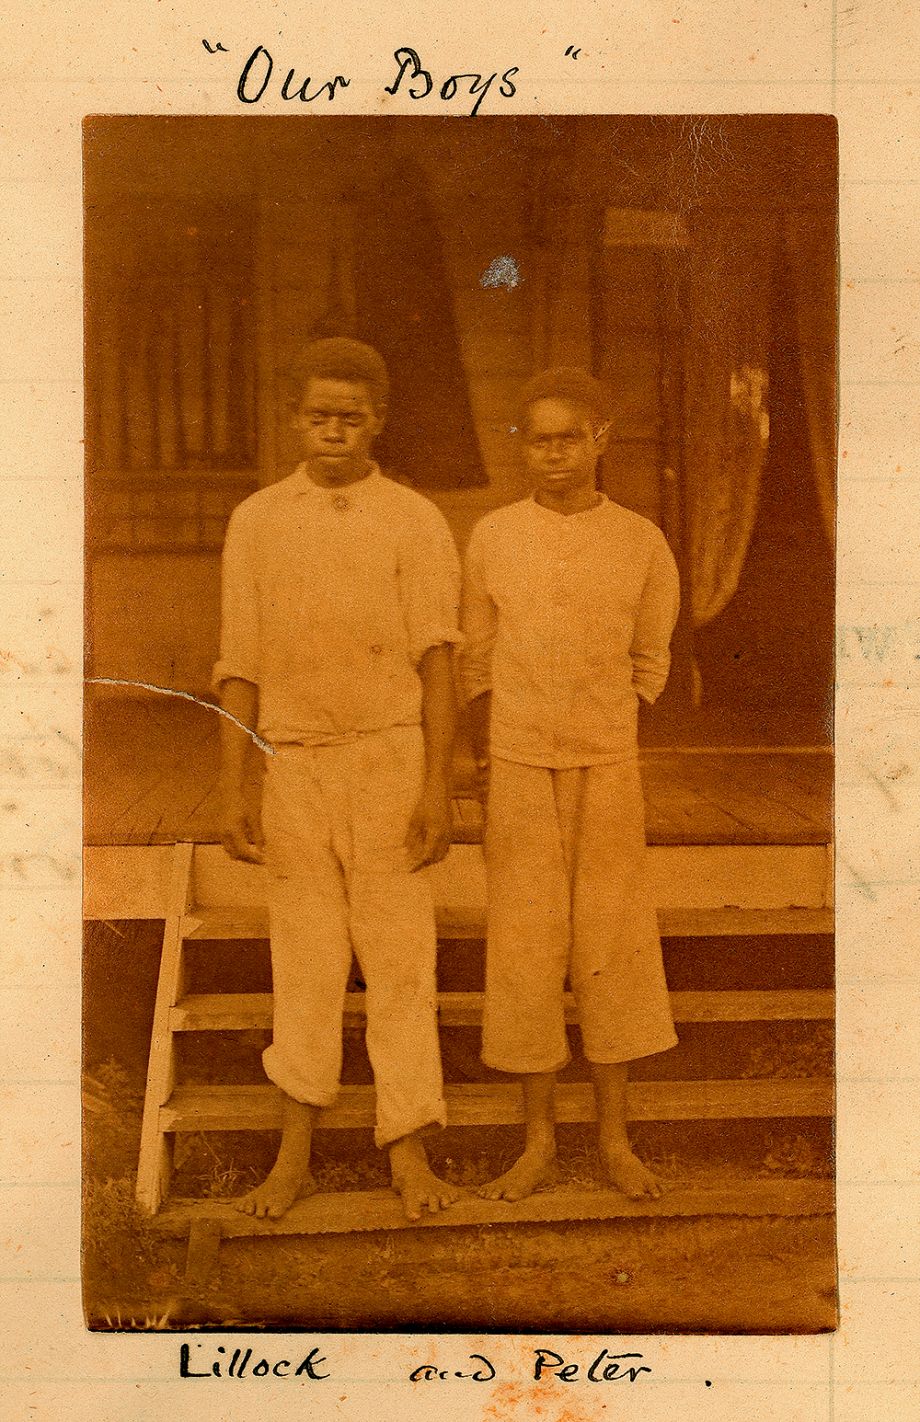 "Our boys" Lillock and Peter, South Sea Islanders working at The Hollow